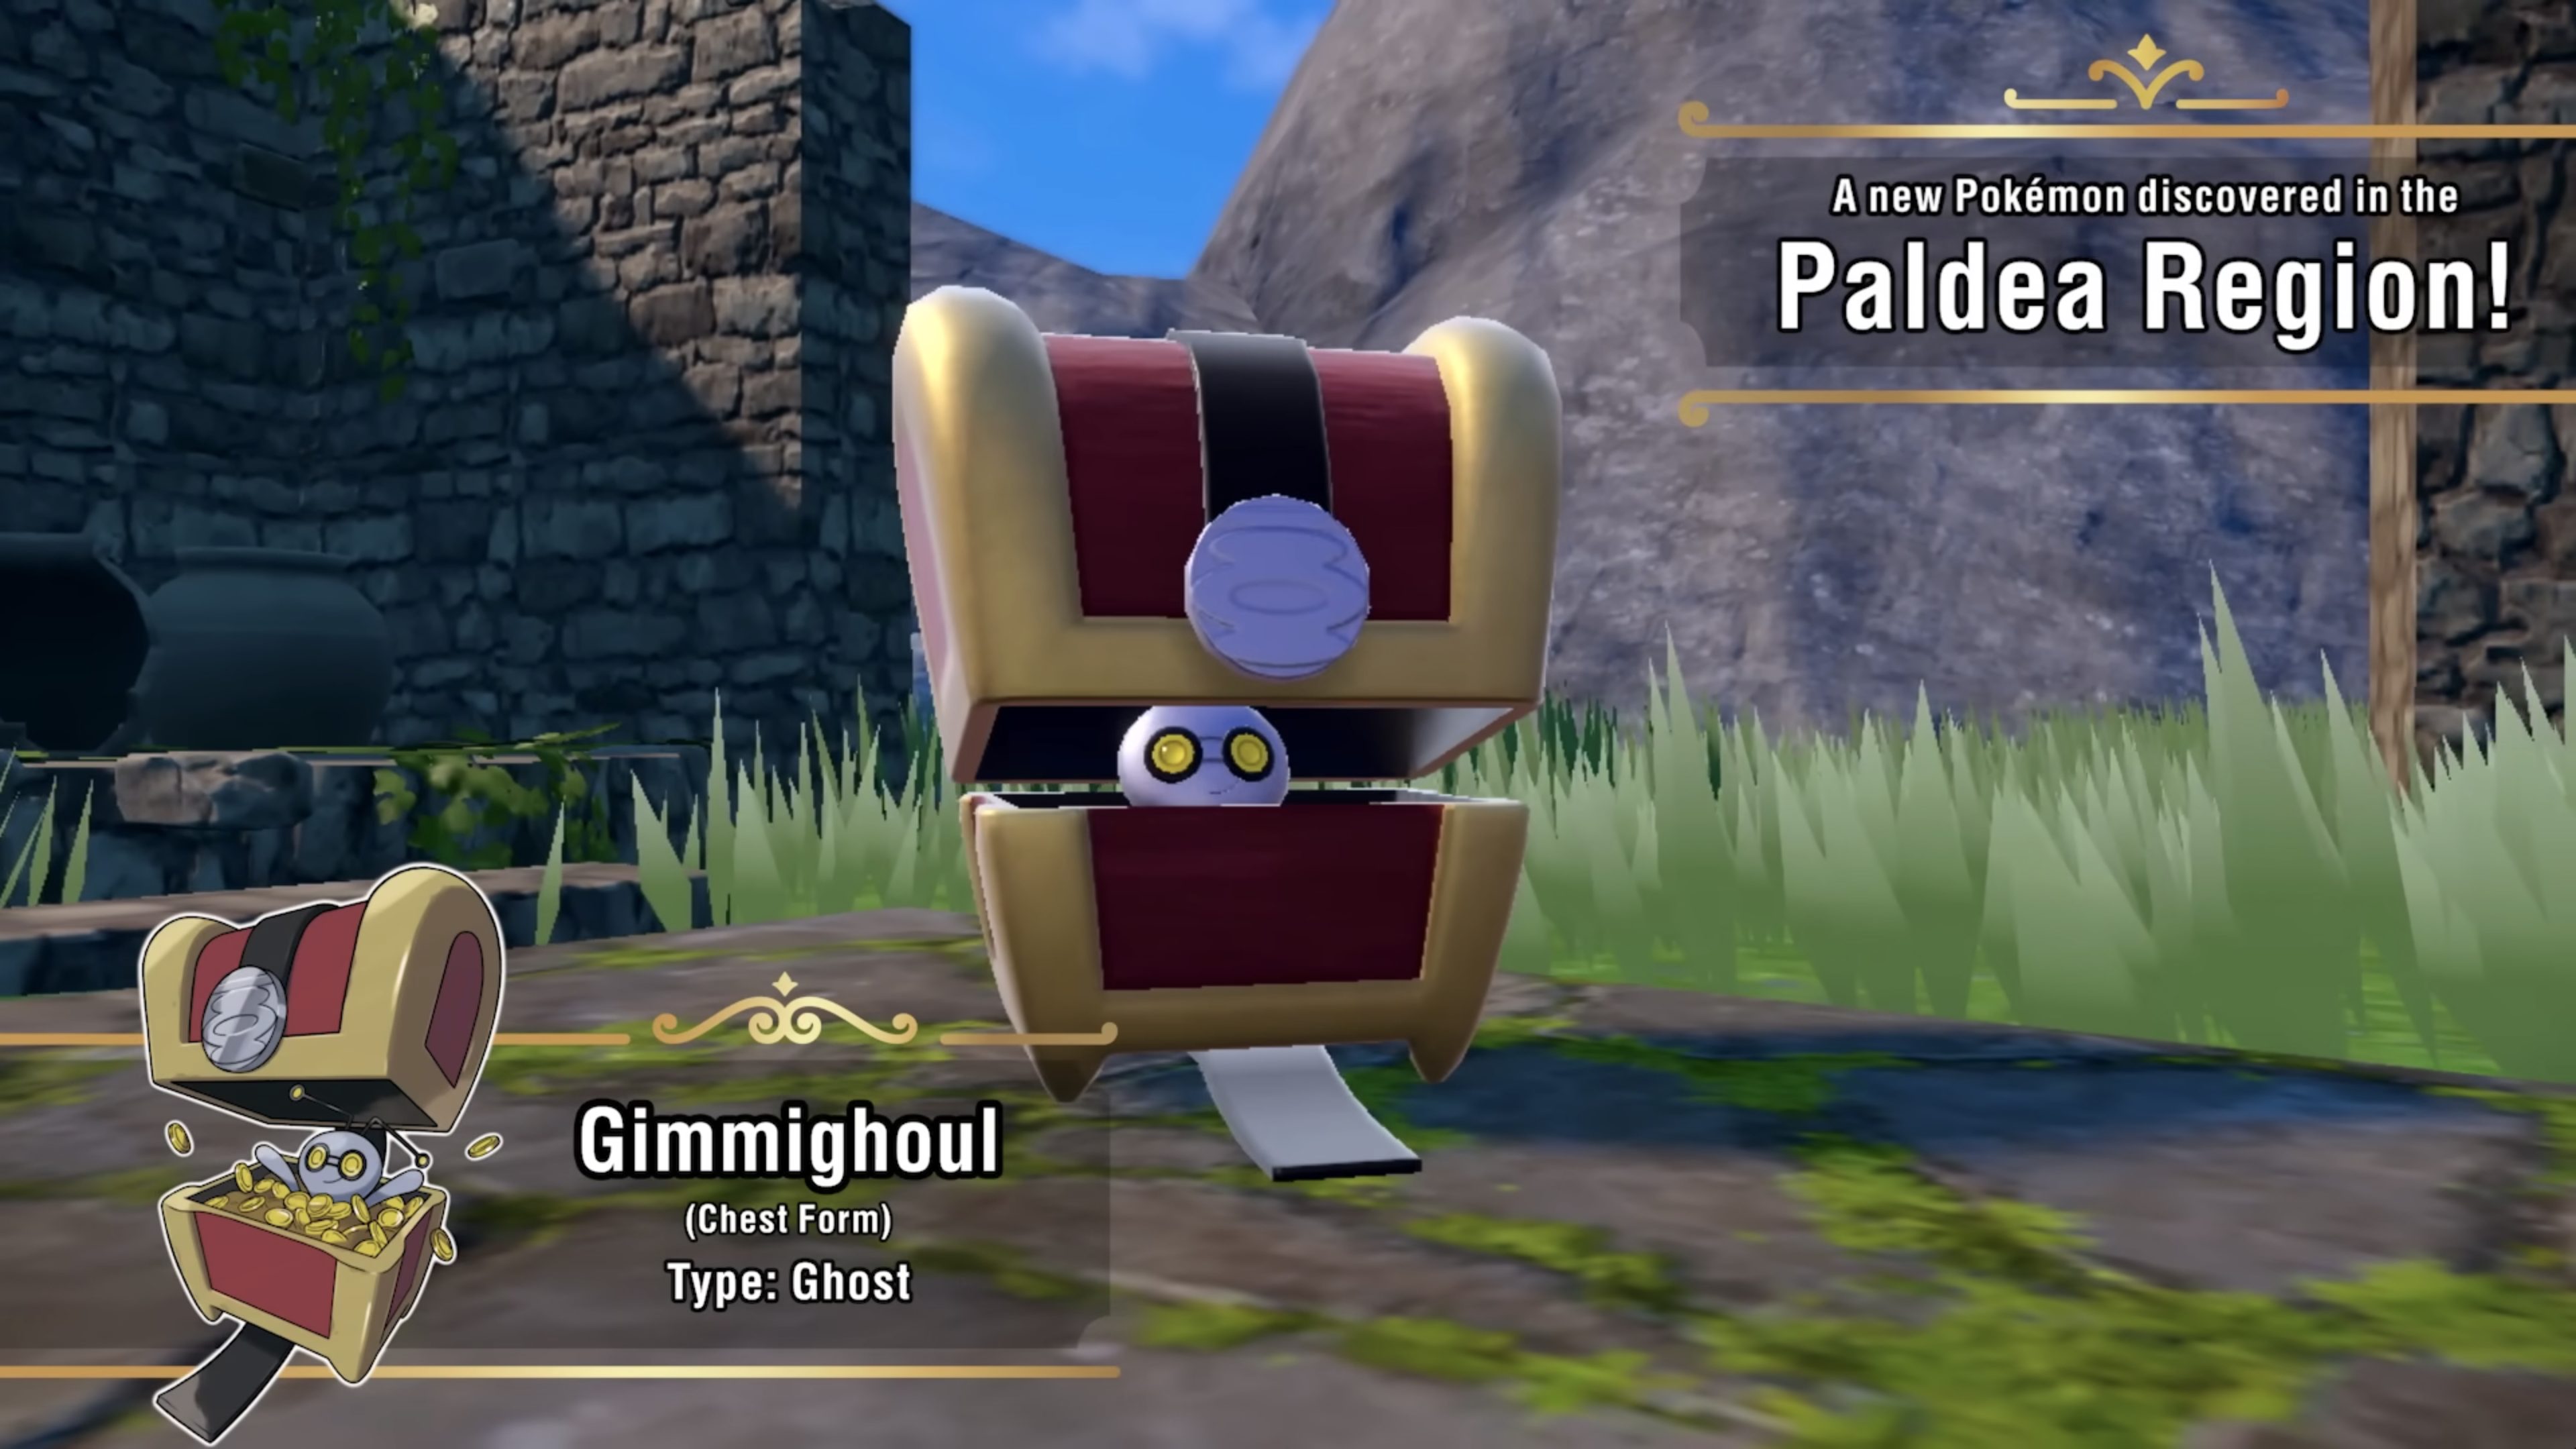 A new discovery! Gimmighoul, a Pokémon from the Paldea region